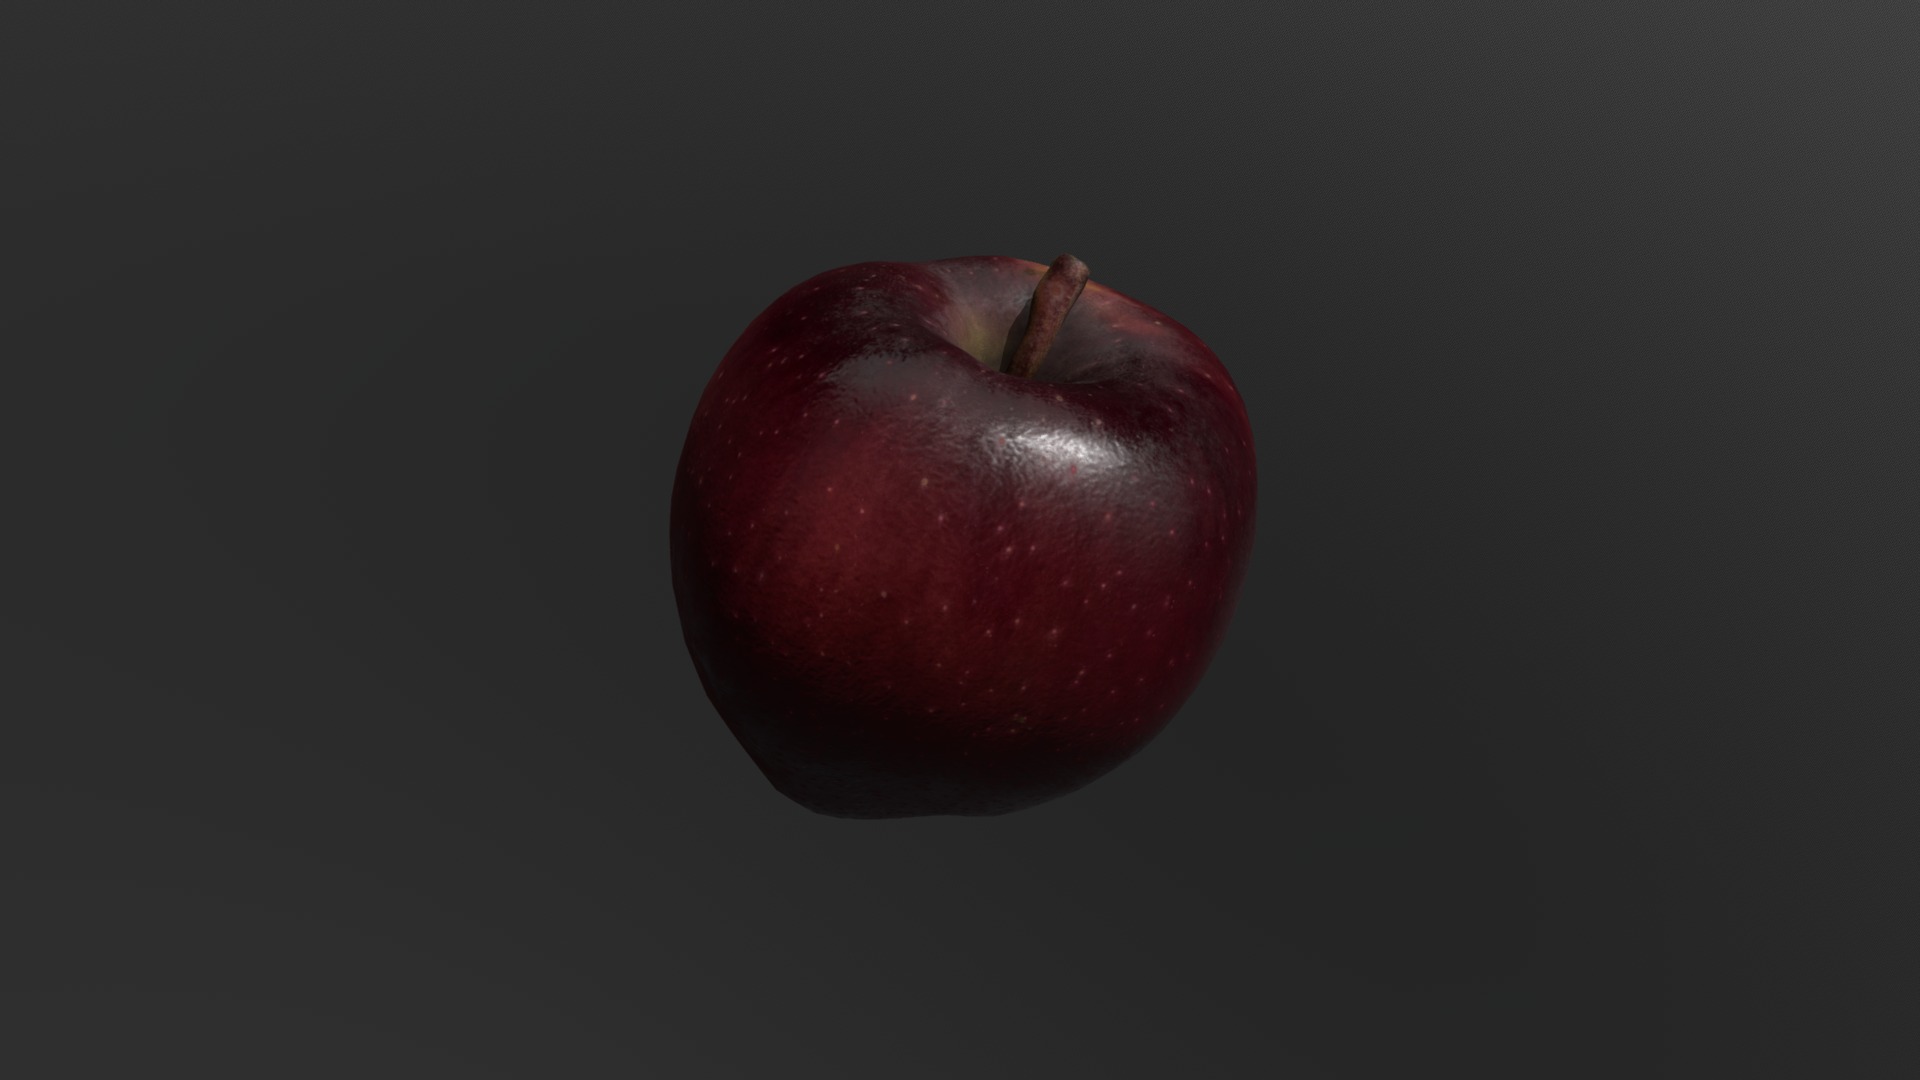 3D model Apple - This is a 3D model of the Apple. The 3D model is about a red apple on a grey background.